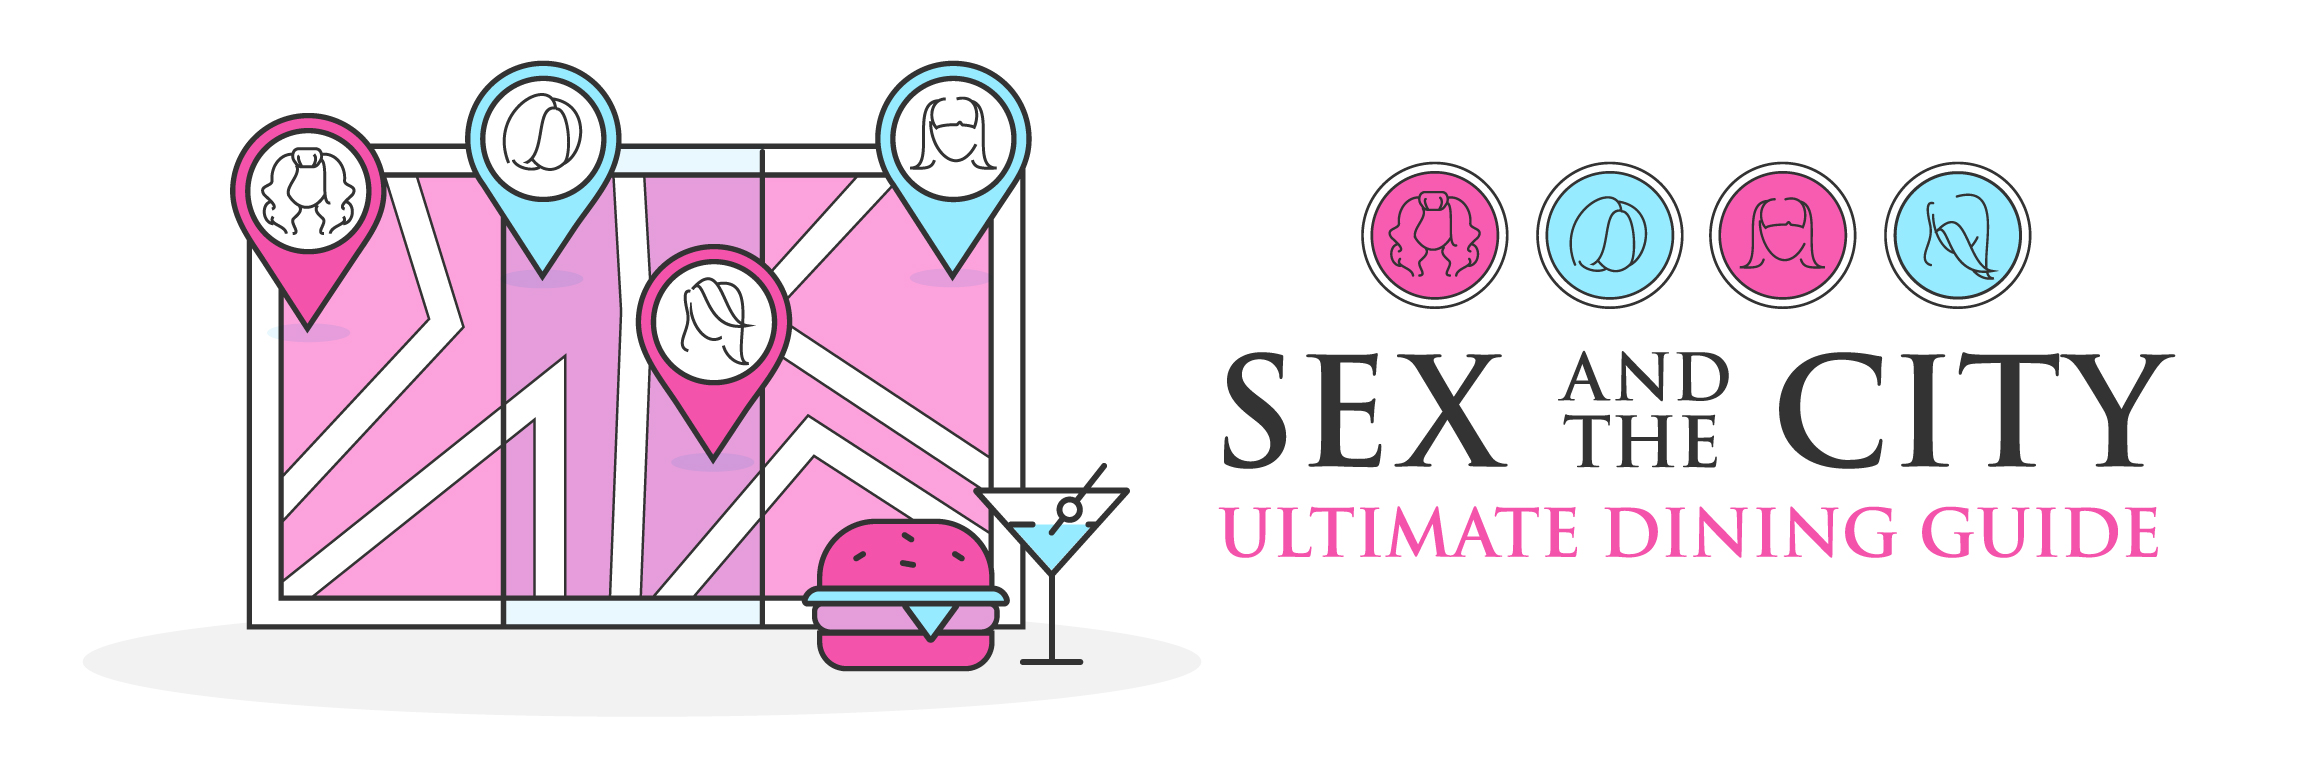 Sex and the City Illustration